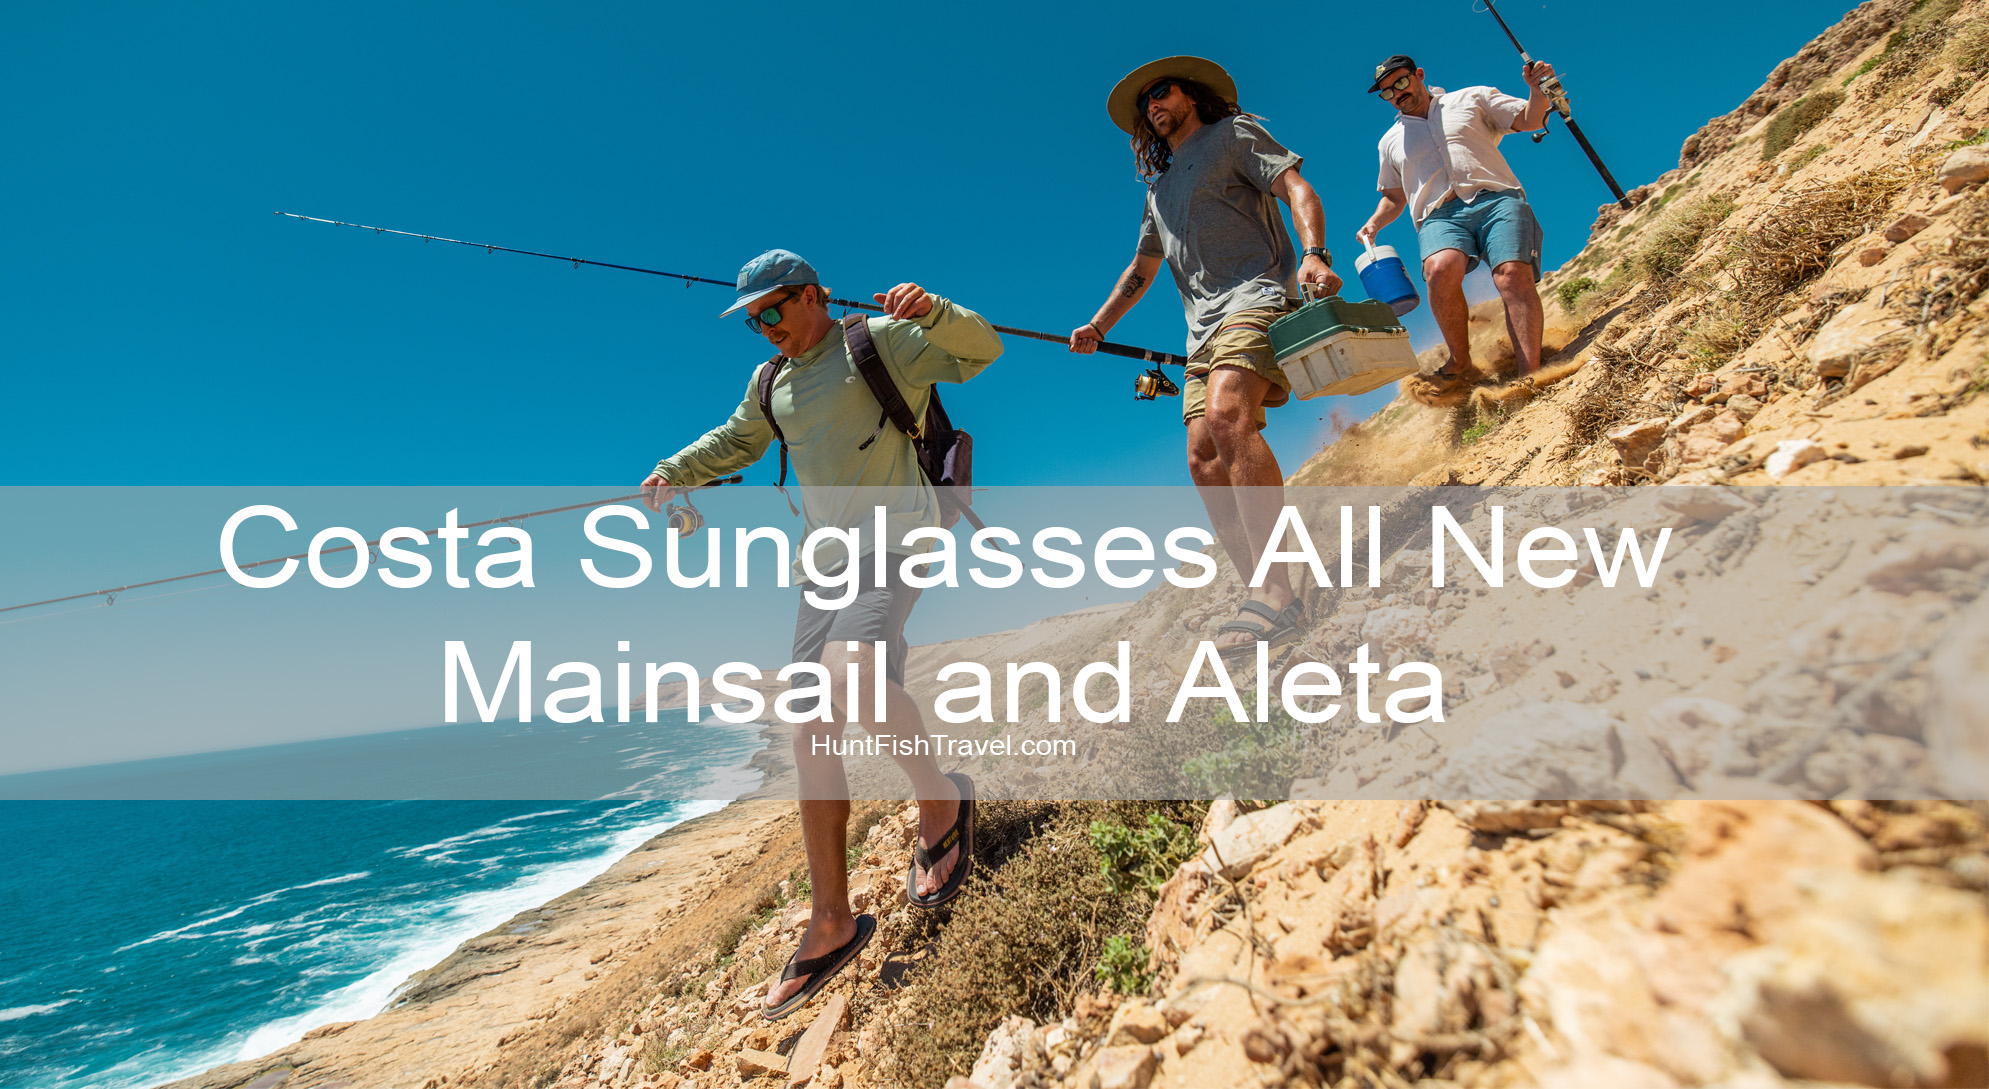 Costa Sunglasses grows its hybrid category with frames built for life on and off the water – Mainsail and Aleta